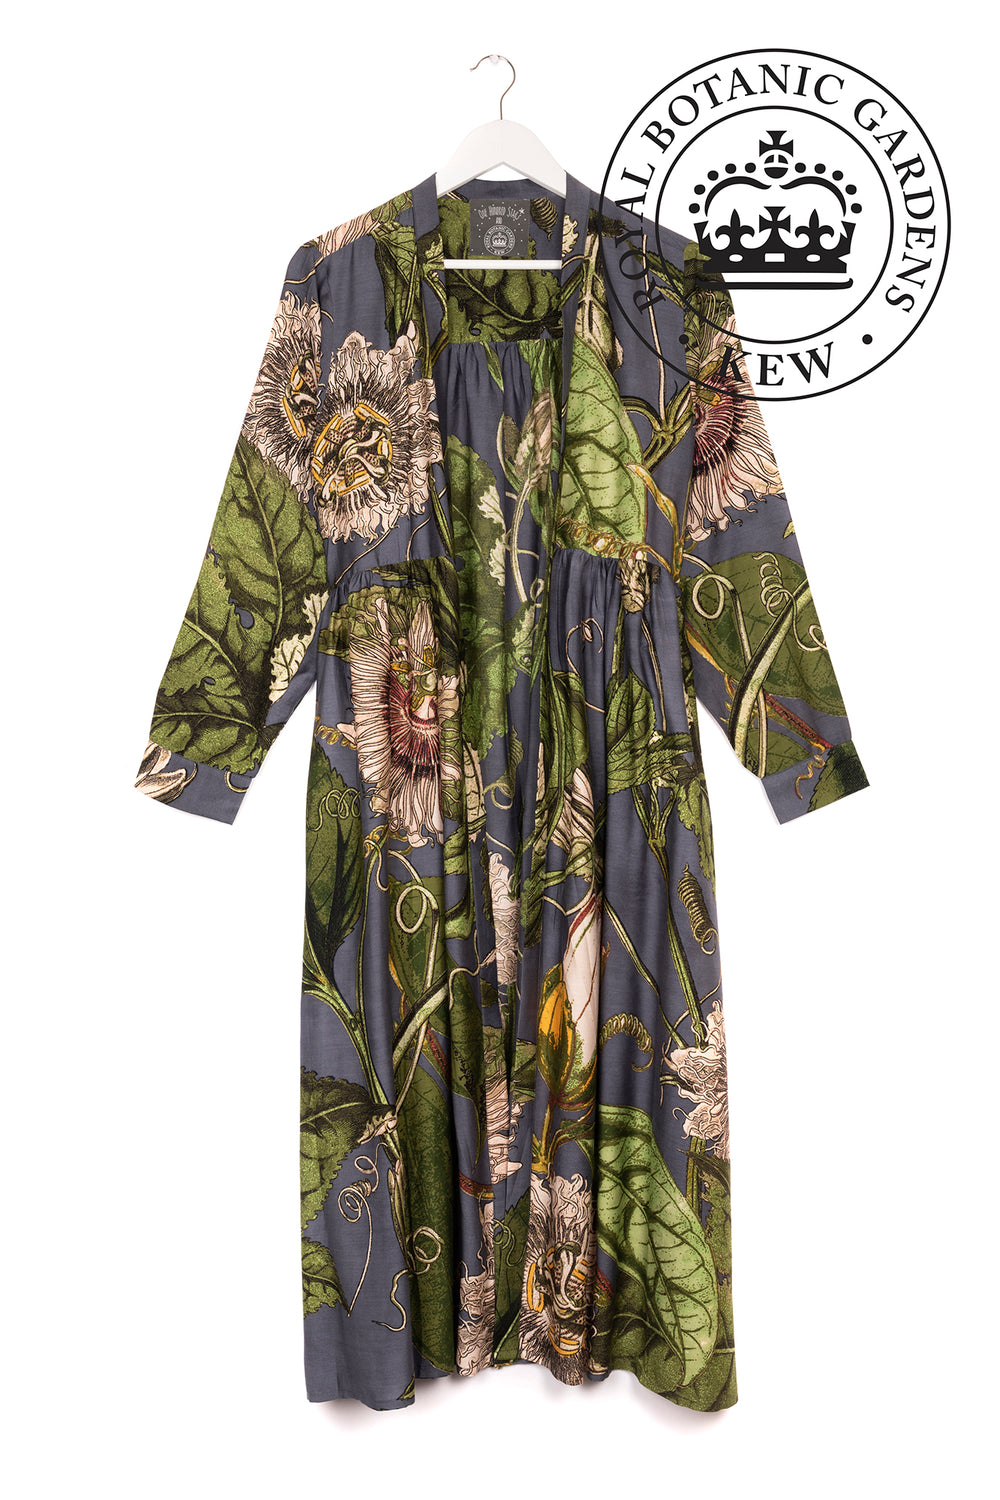 Passion Flower or 'Passiflora' print duster coat in grey, as part of the The One Hundred Stars collaboration with KEW Royal Botanic Gardens. 